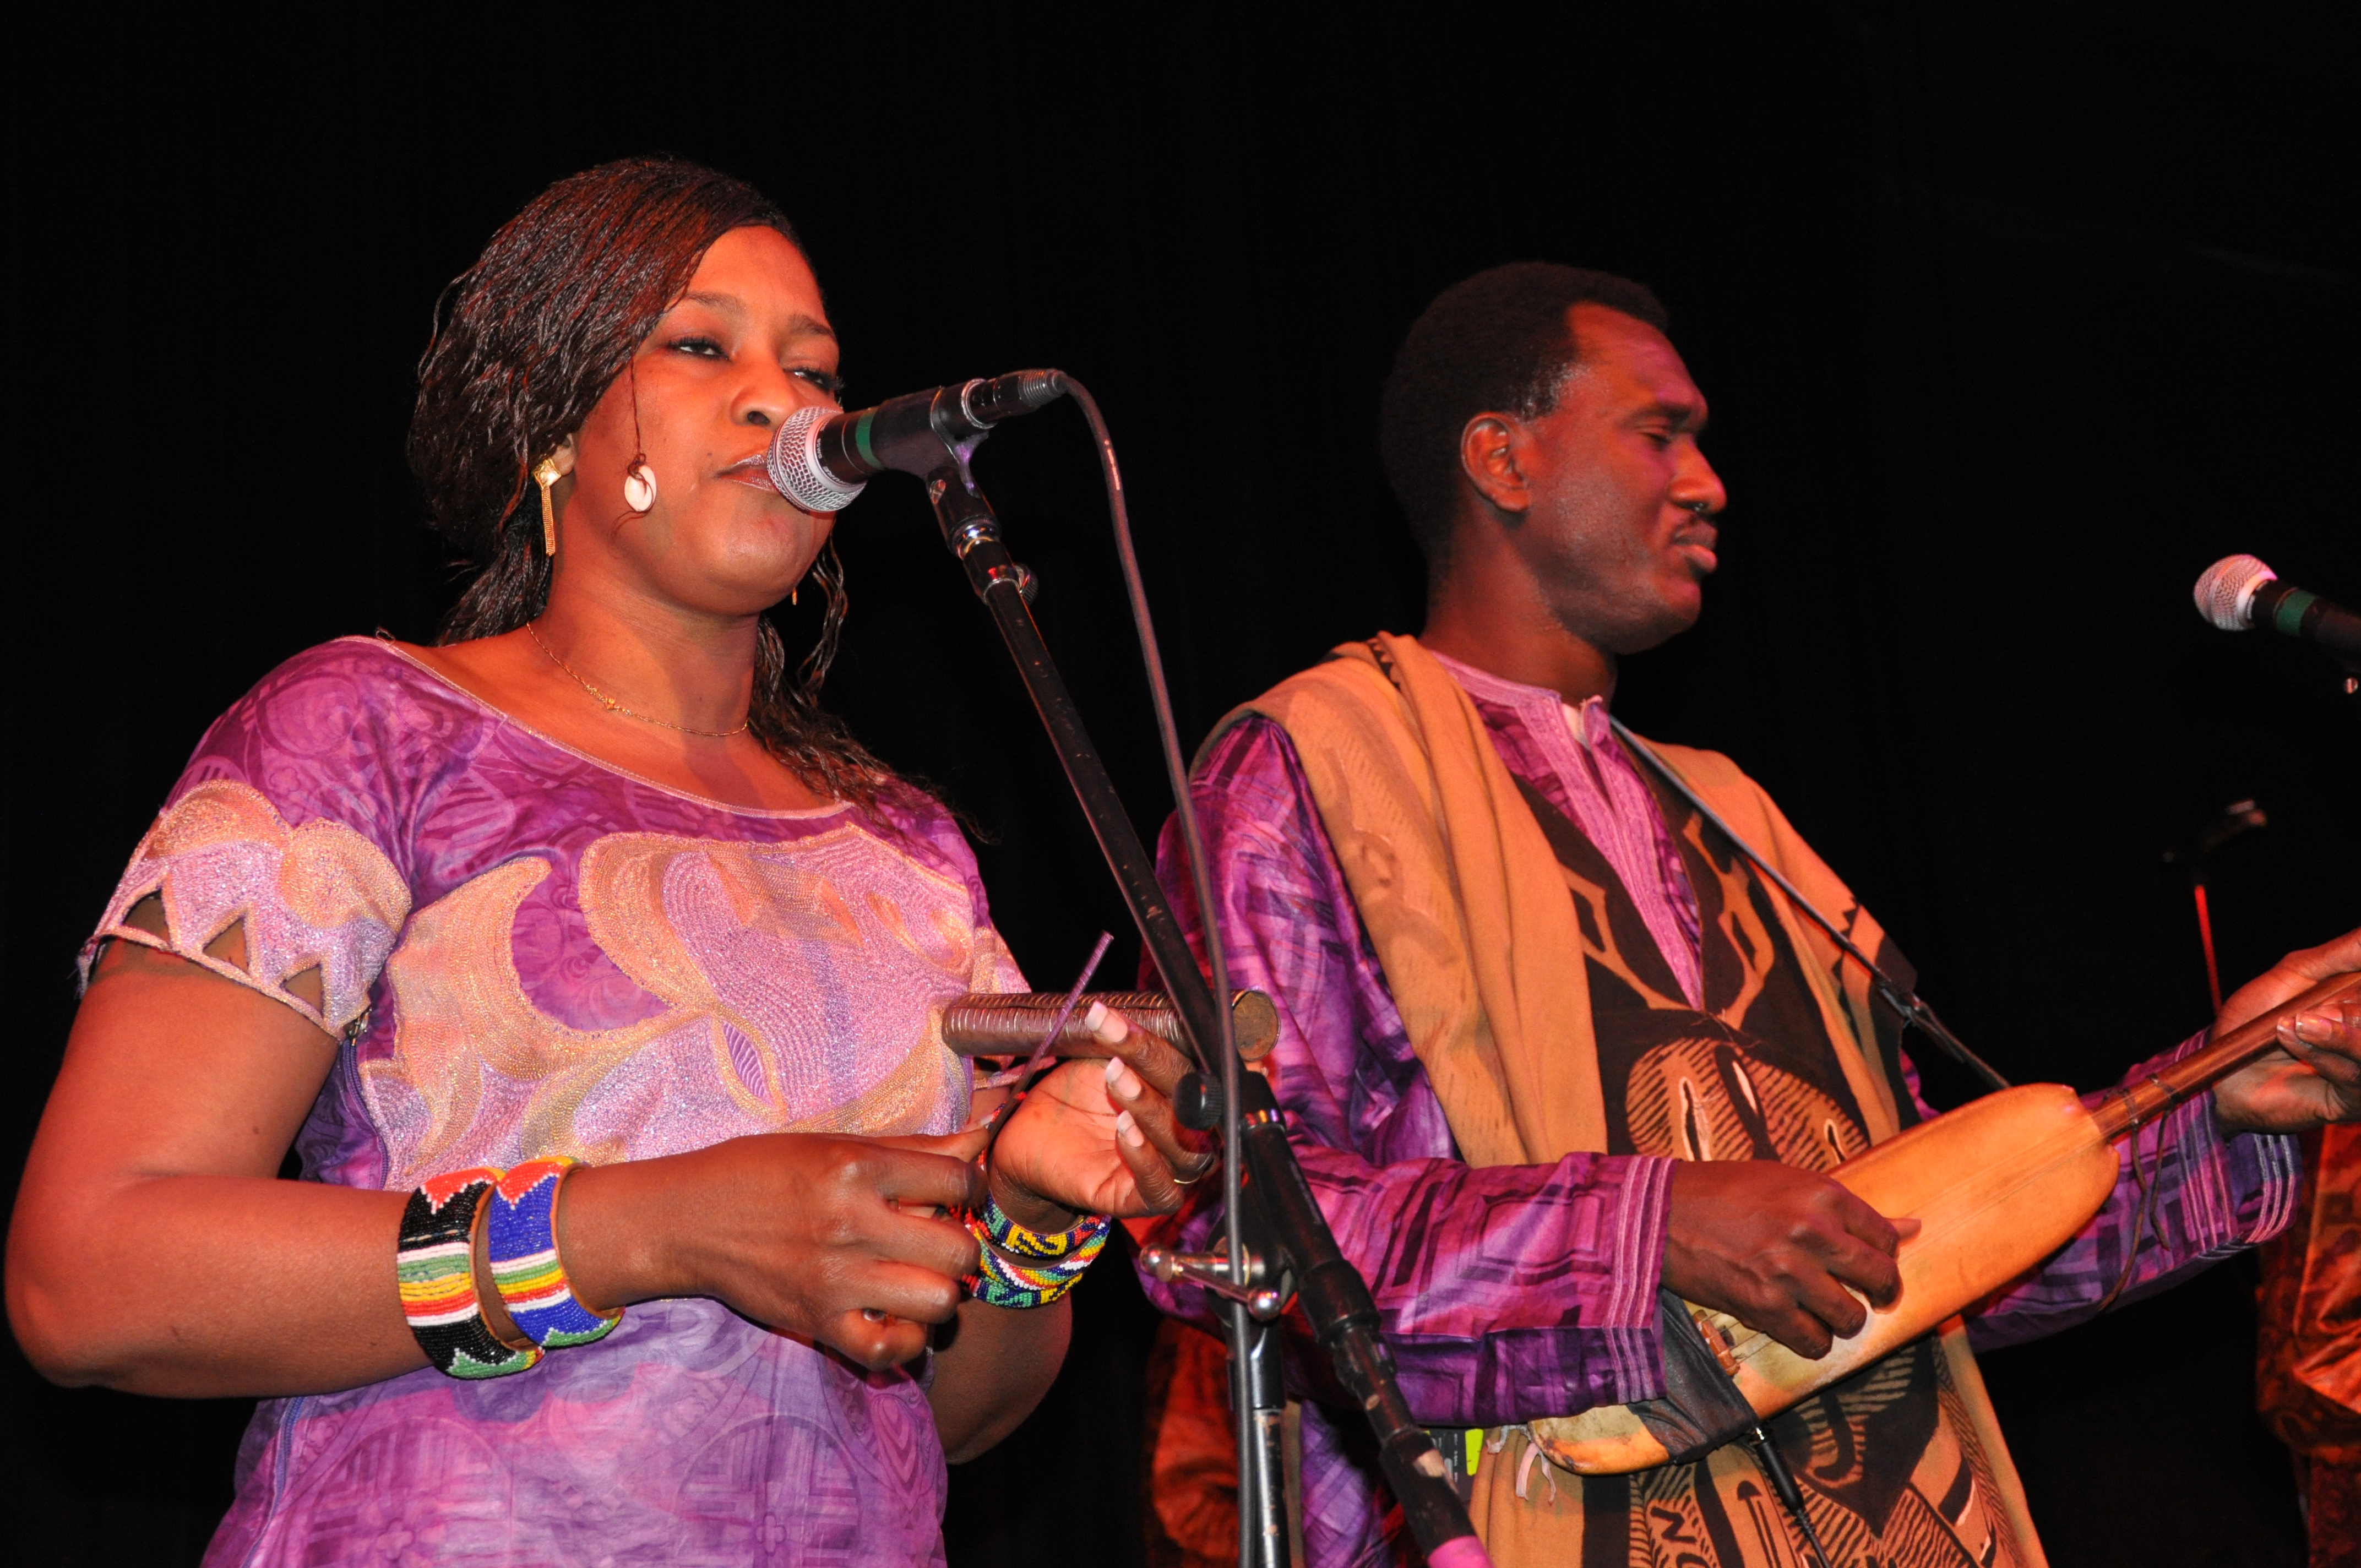 A woman singing into a microphone and a man playing a traditional stringed instrument on stage, both dressed in colorful african attire.